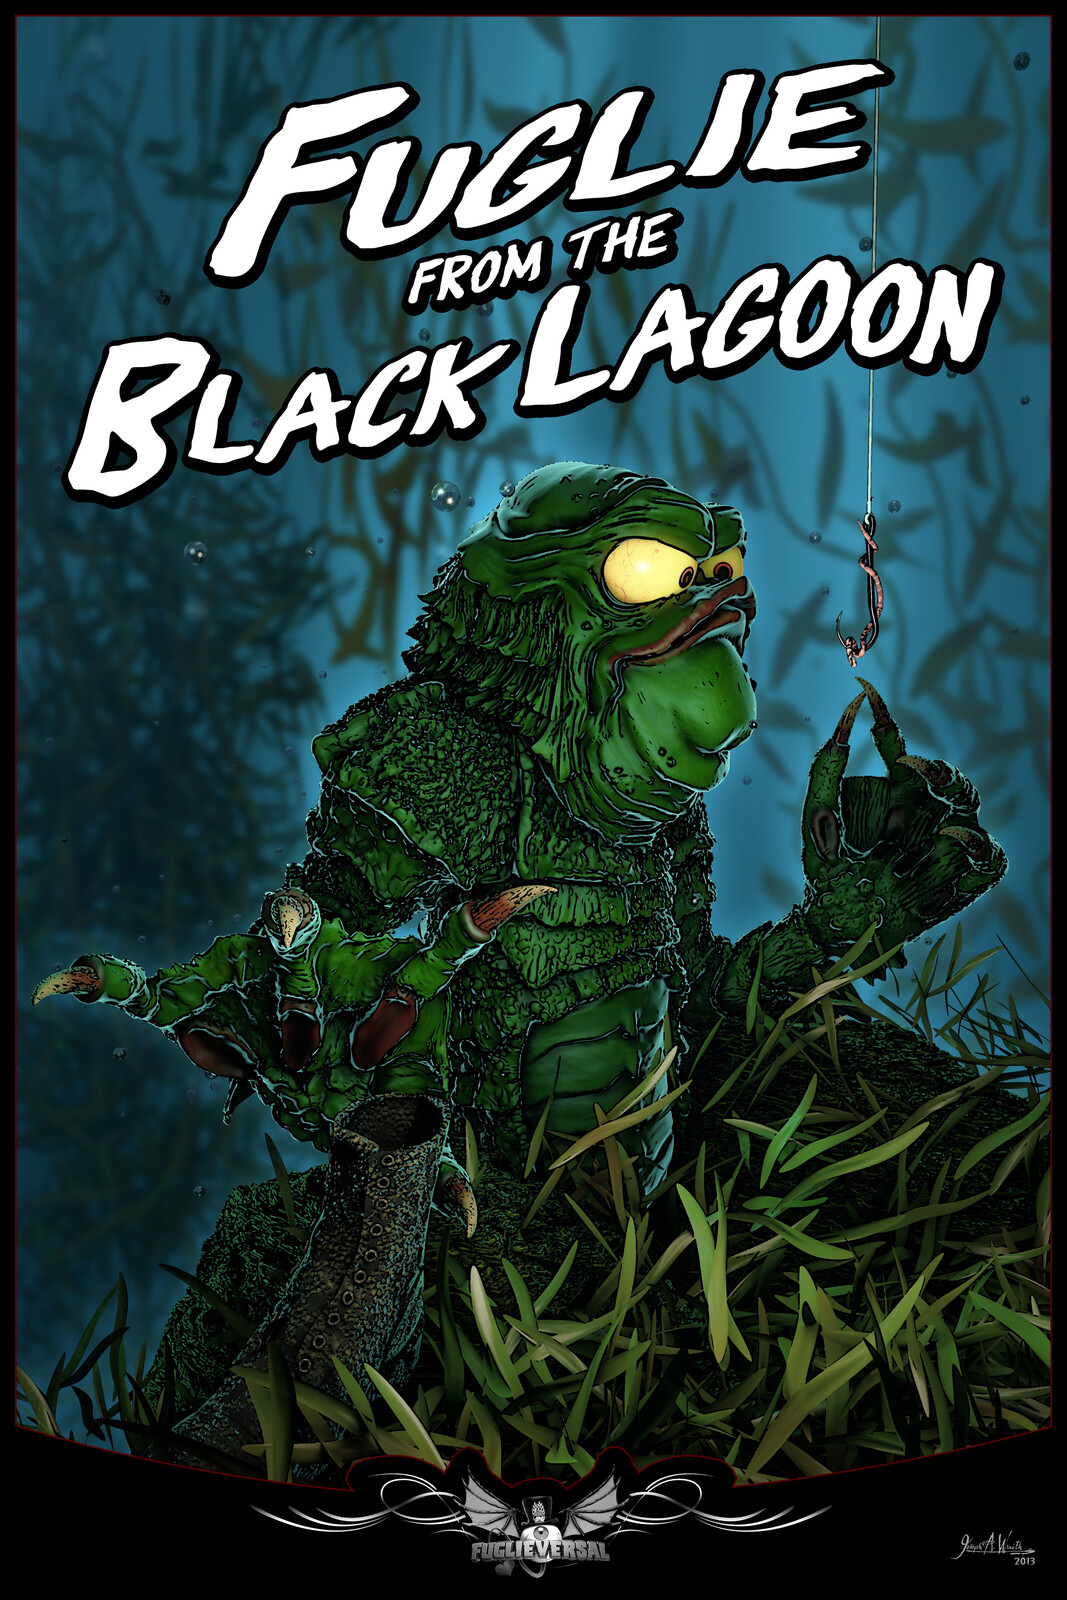 The Fuglie from The Black Lagoon